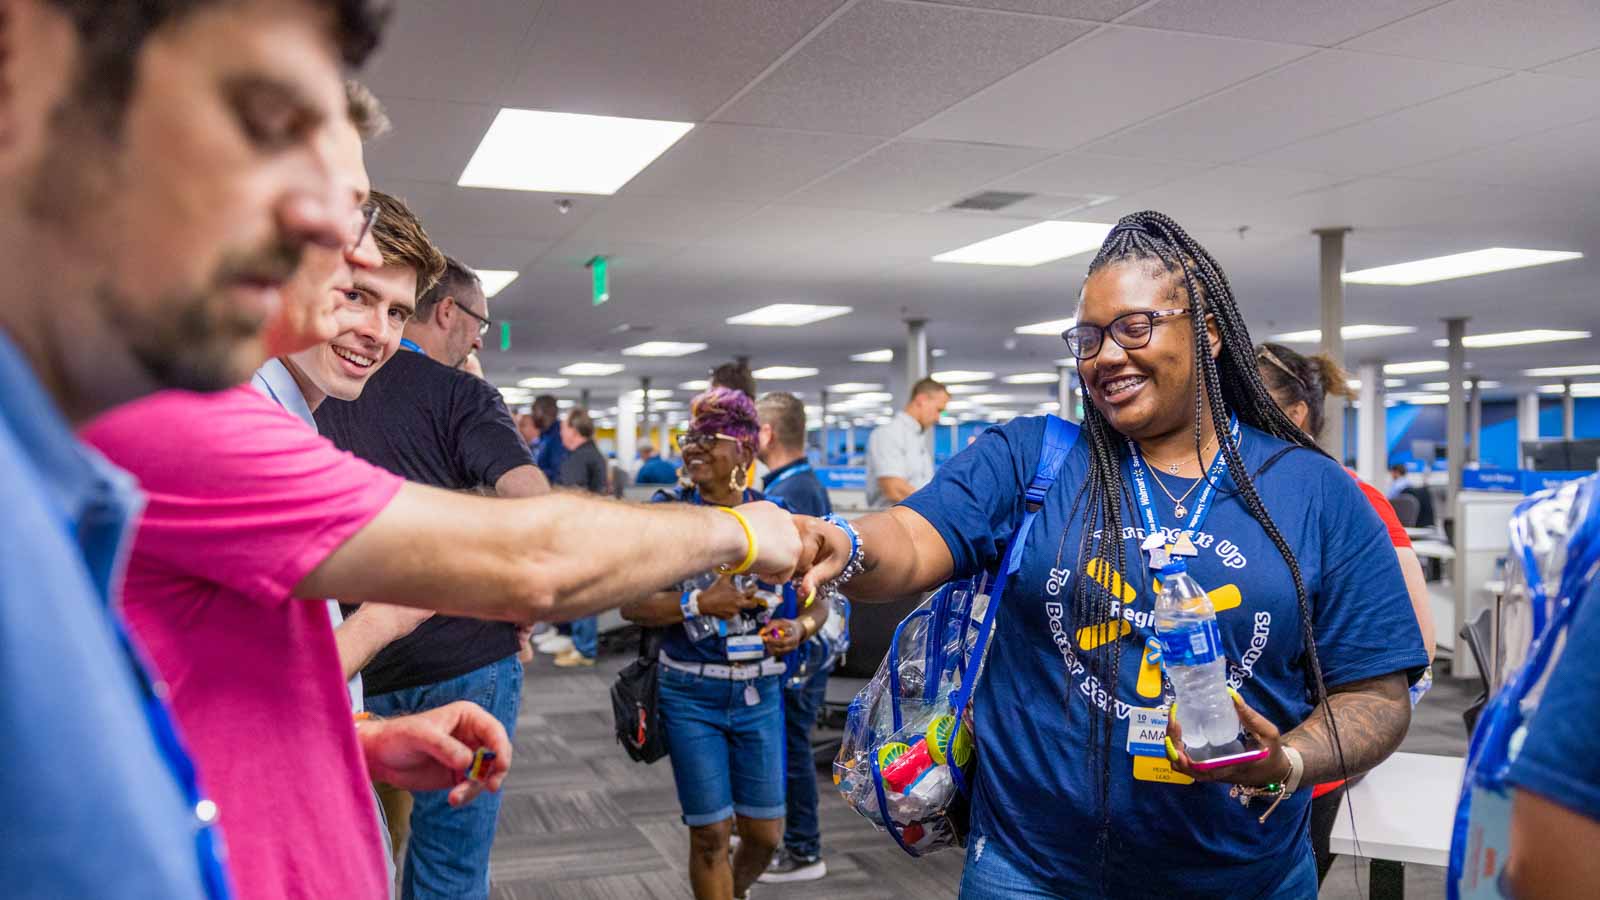 Associates visiting the Walmart Home Office in Bentonville, Ark., are greeted by home office associates, high fives and swag.